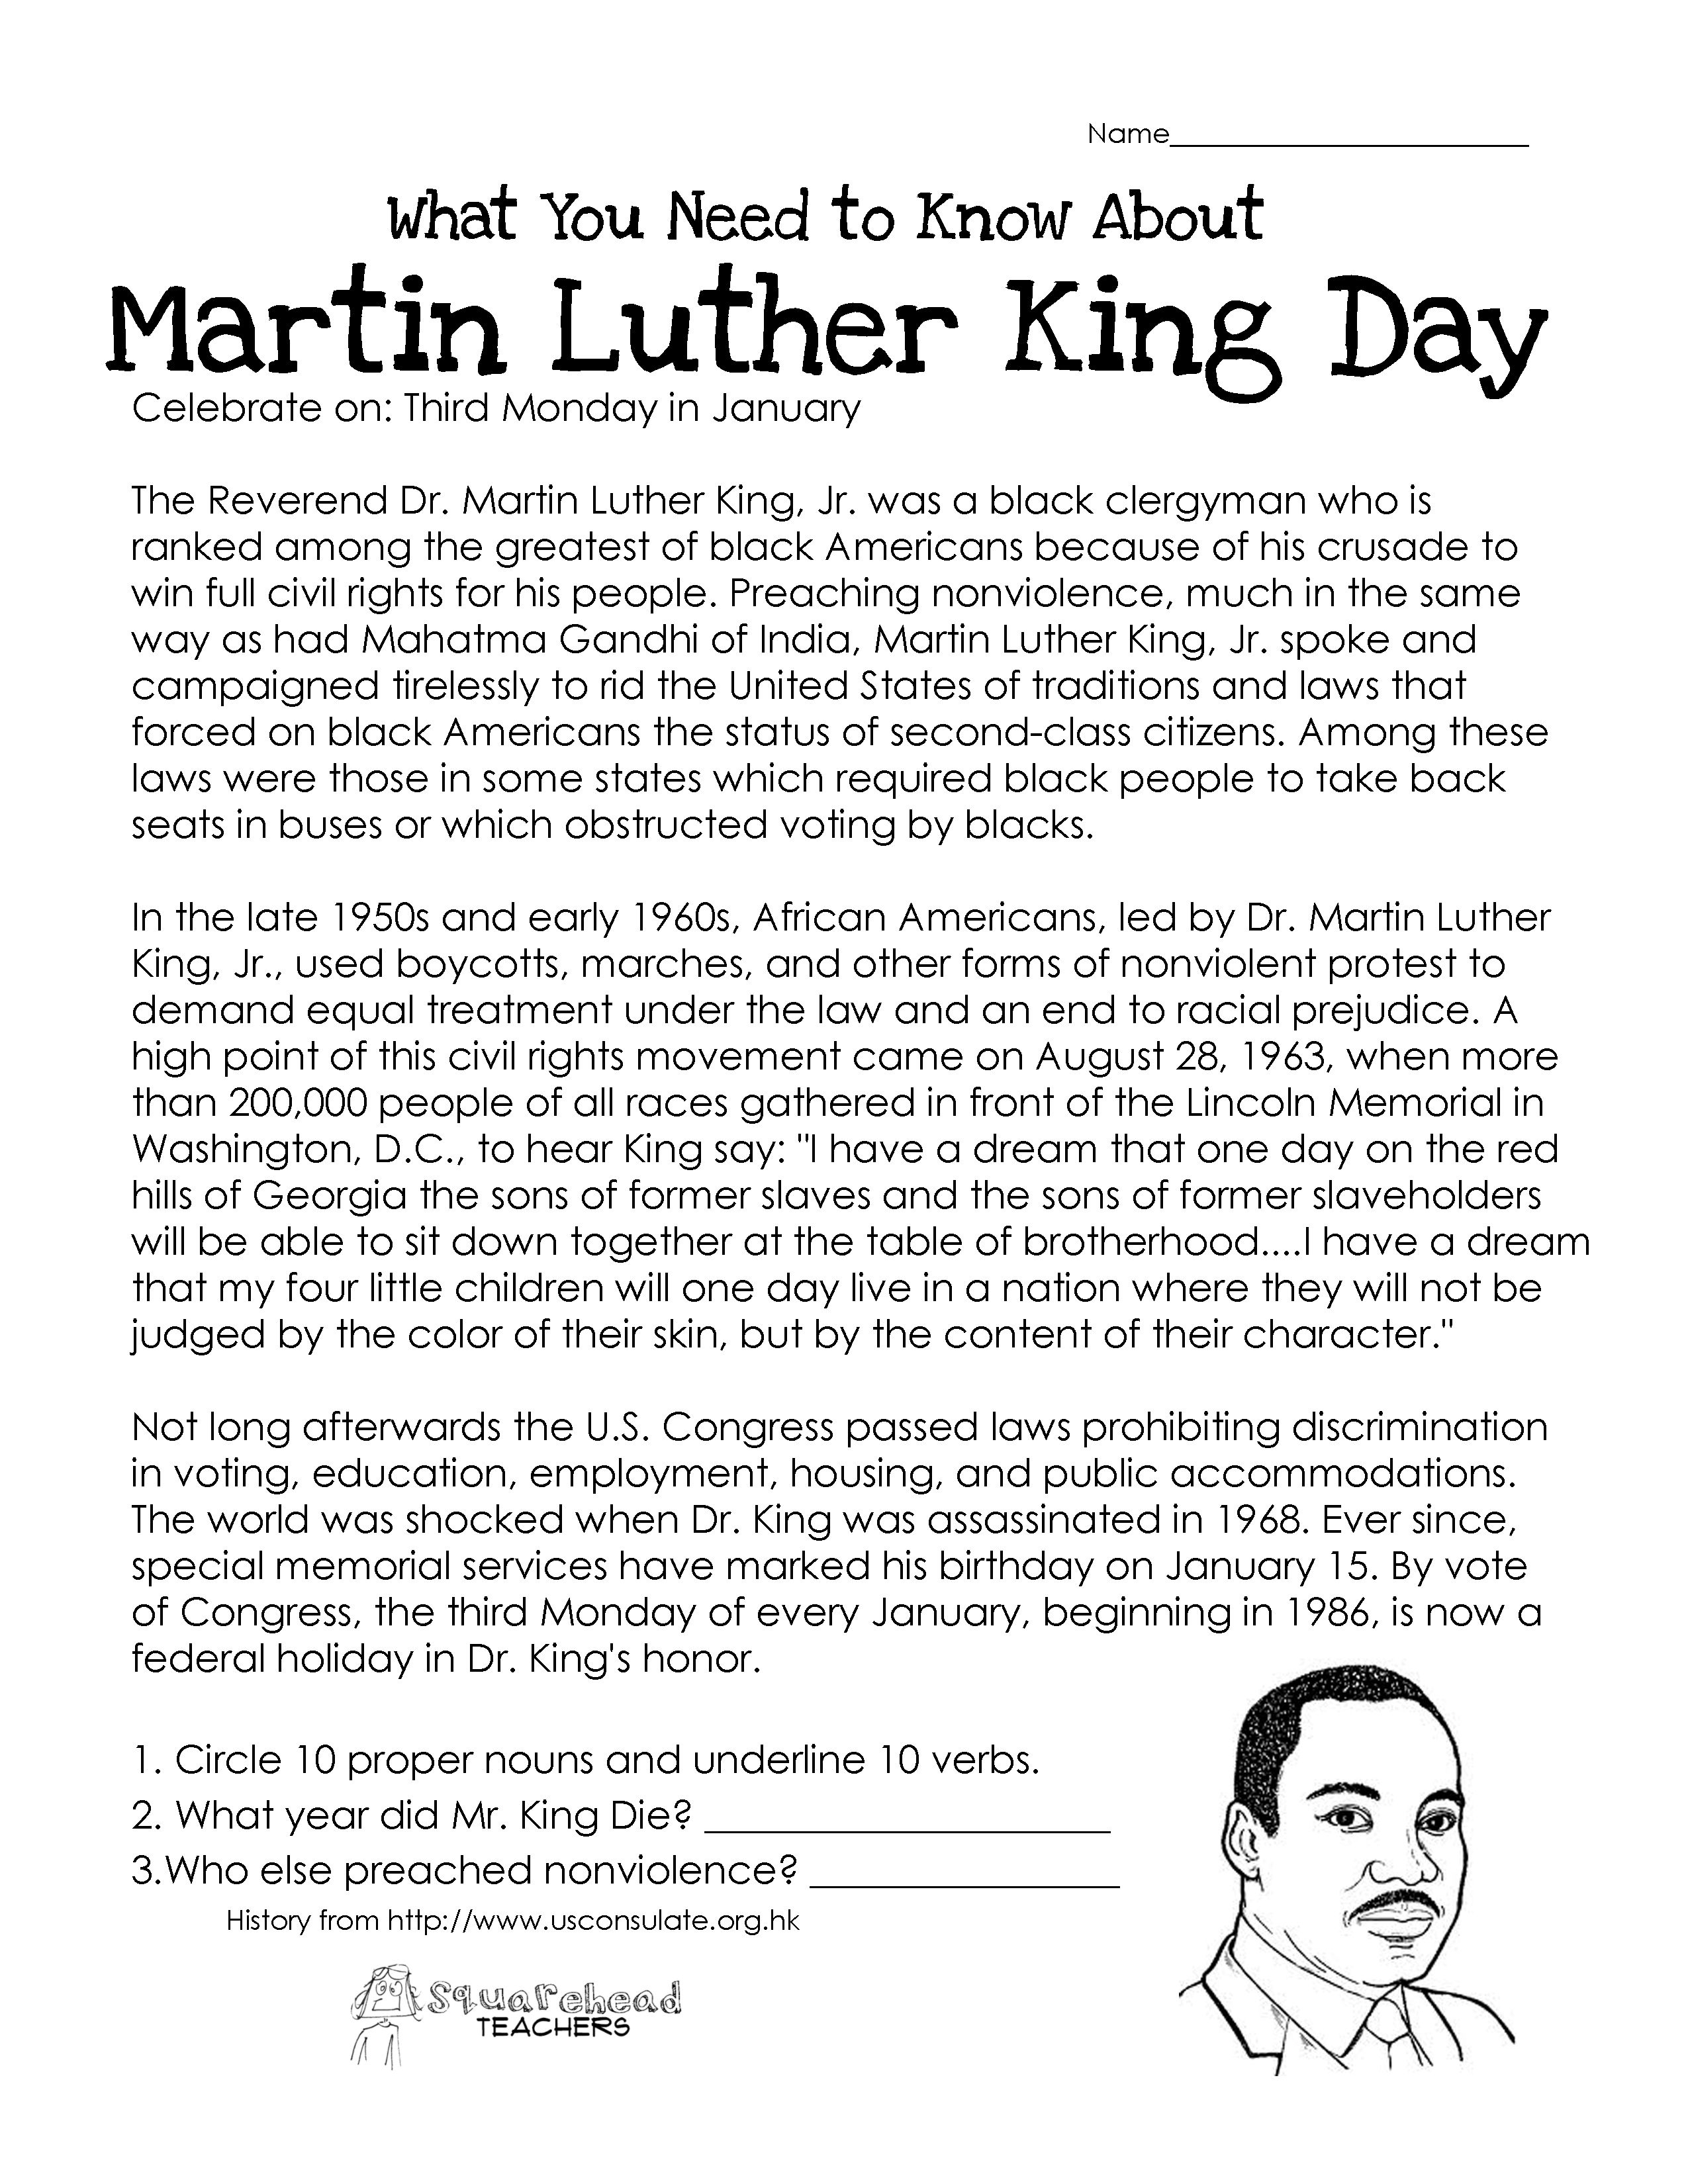 This Free Worksheet About Martin Luther King Day Covers The Basic | Free Printable Martin Luther King Jr Worksheets